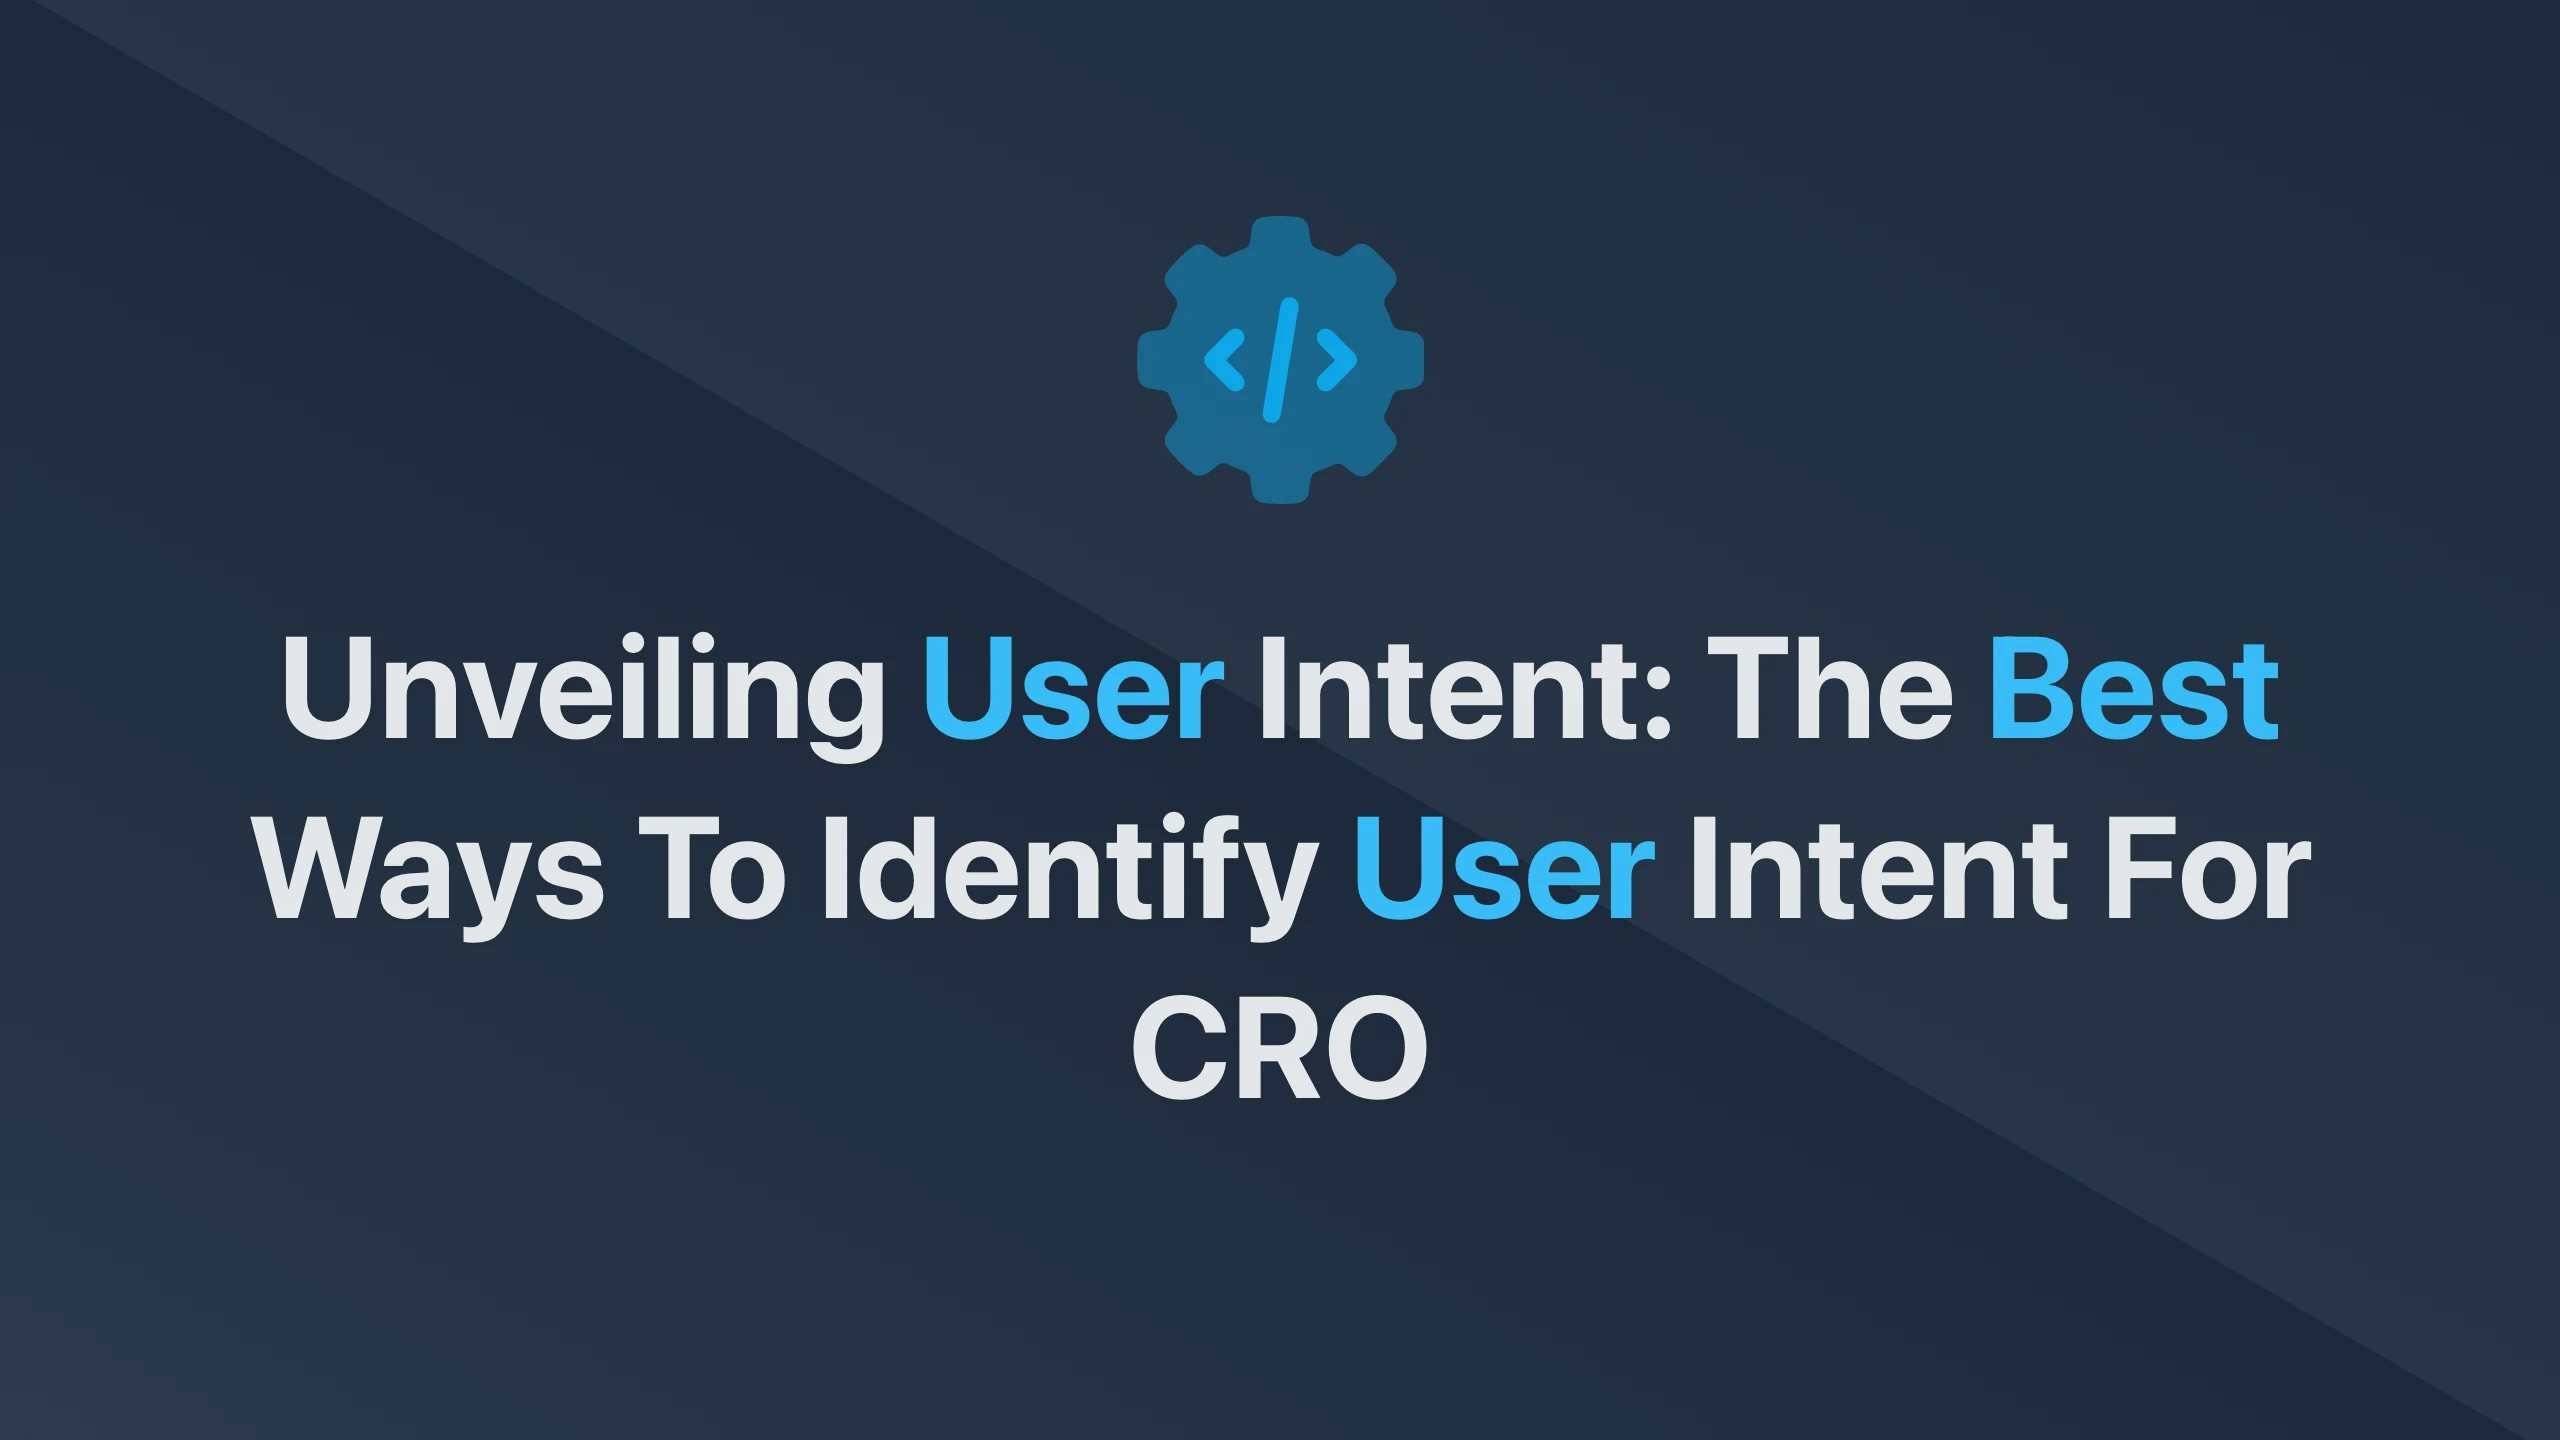 Cover Image for Unveiling User Intent: The Best Ways to Identify User Intent for CRO